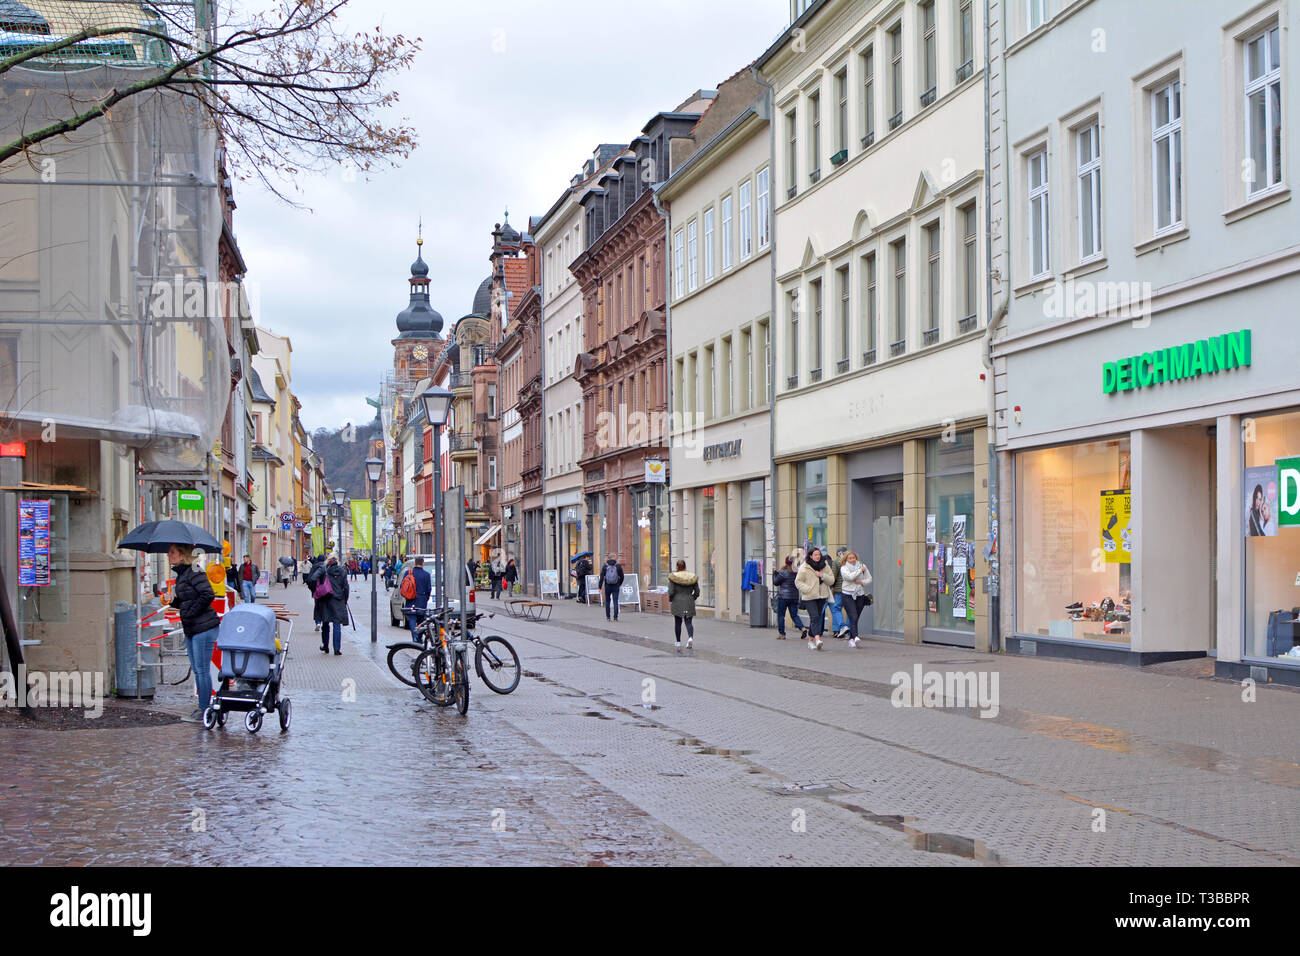 Main street with different stores in old buildings and few people in historical city center on a rainy day Stock Photo